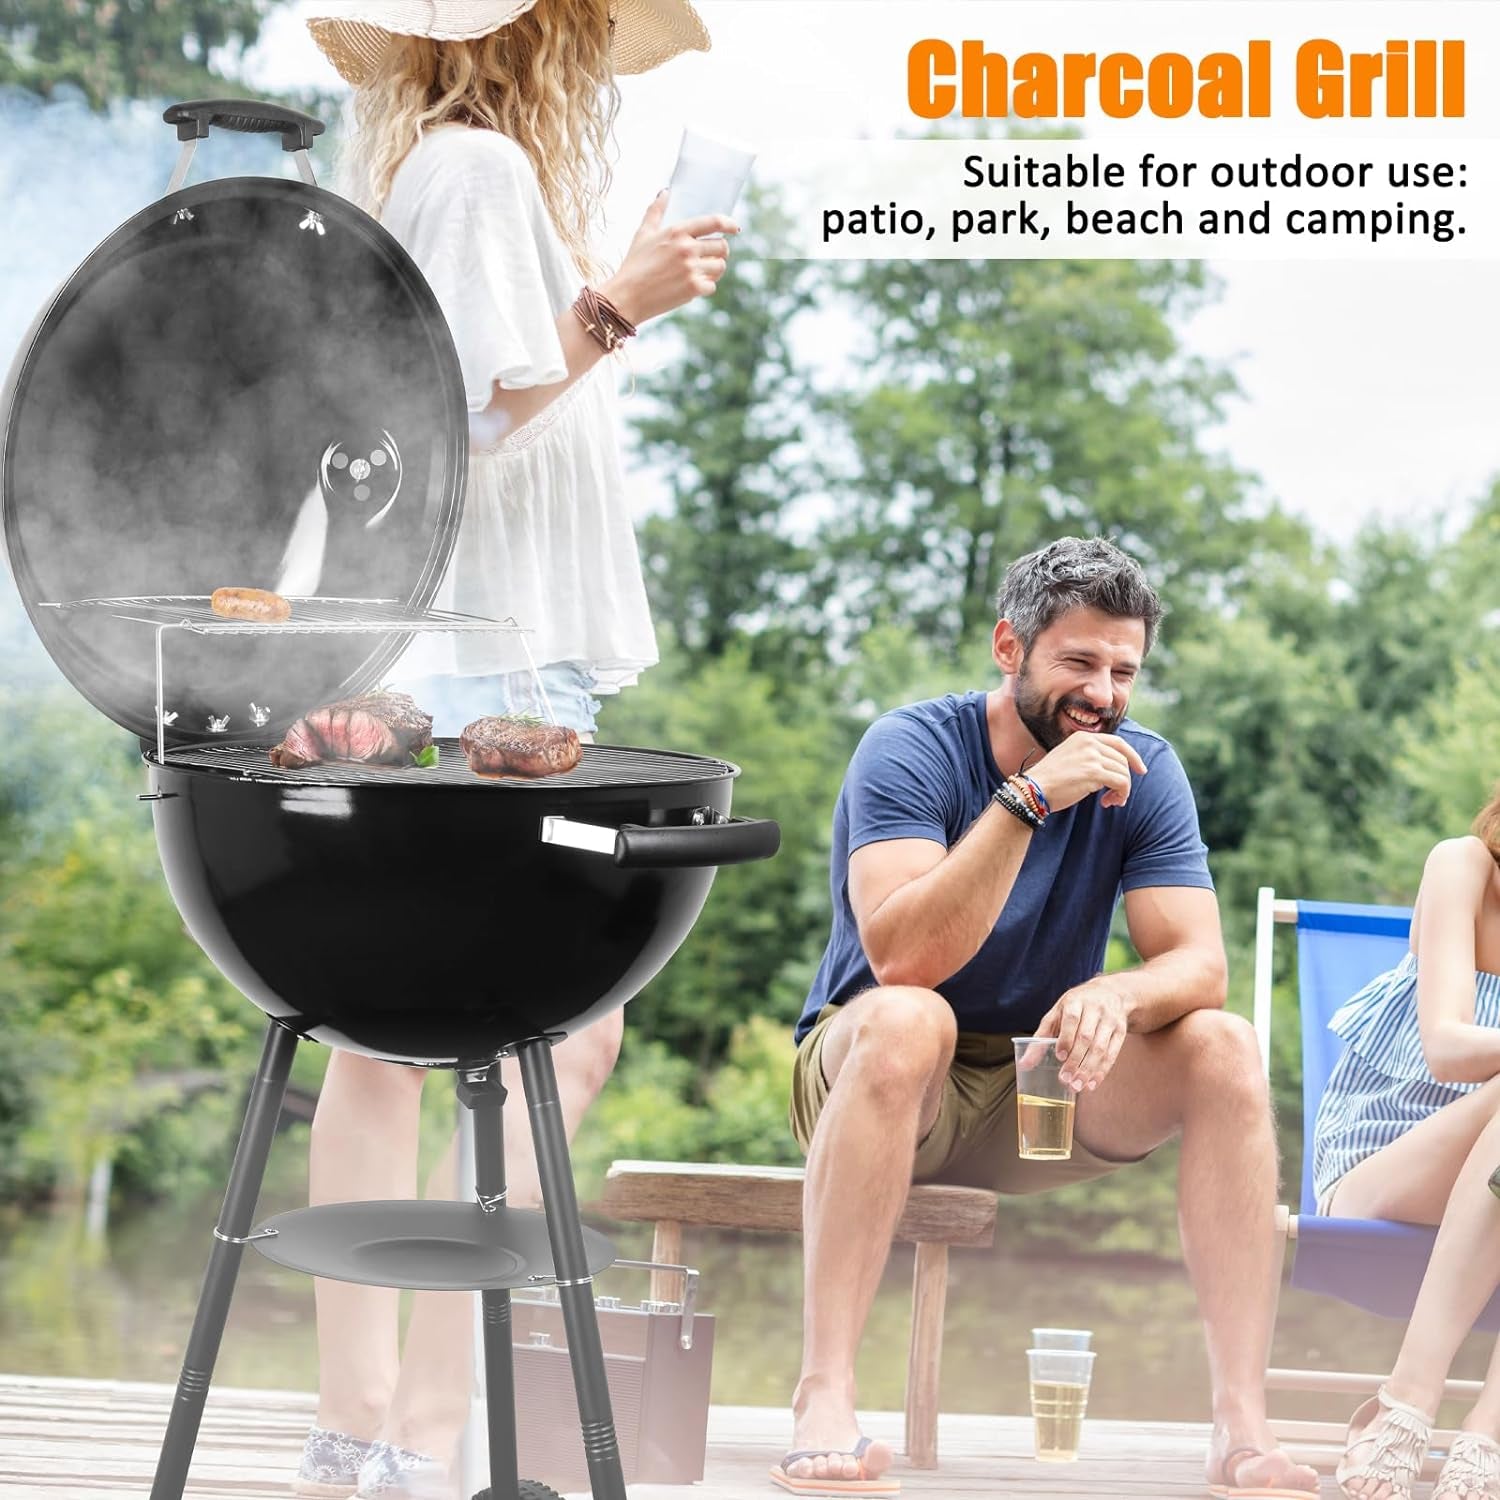 Electric Barbecue Grill Indoor Kettle Charcoal BBQ Grill Outdoor, Electric Grill & Charcoal Grill 2 in 1 for Patio, Camping, Cooking, Backyard with Porcelain-Enameled Lid and Wheels Black